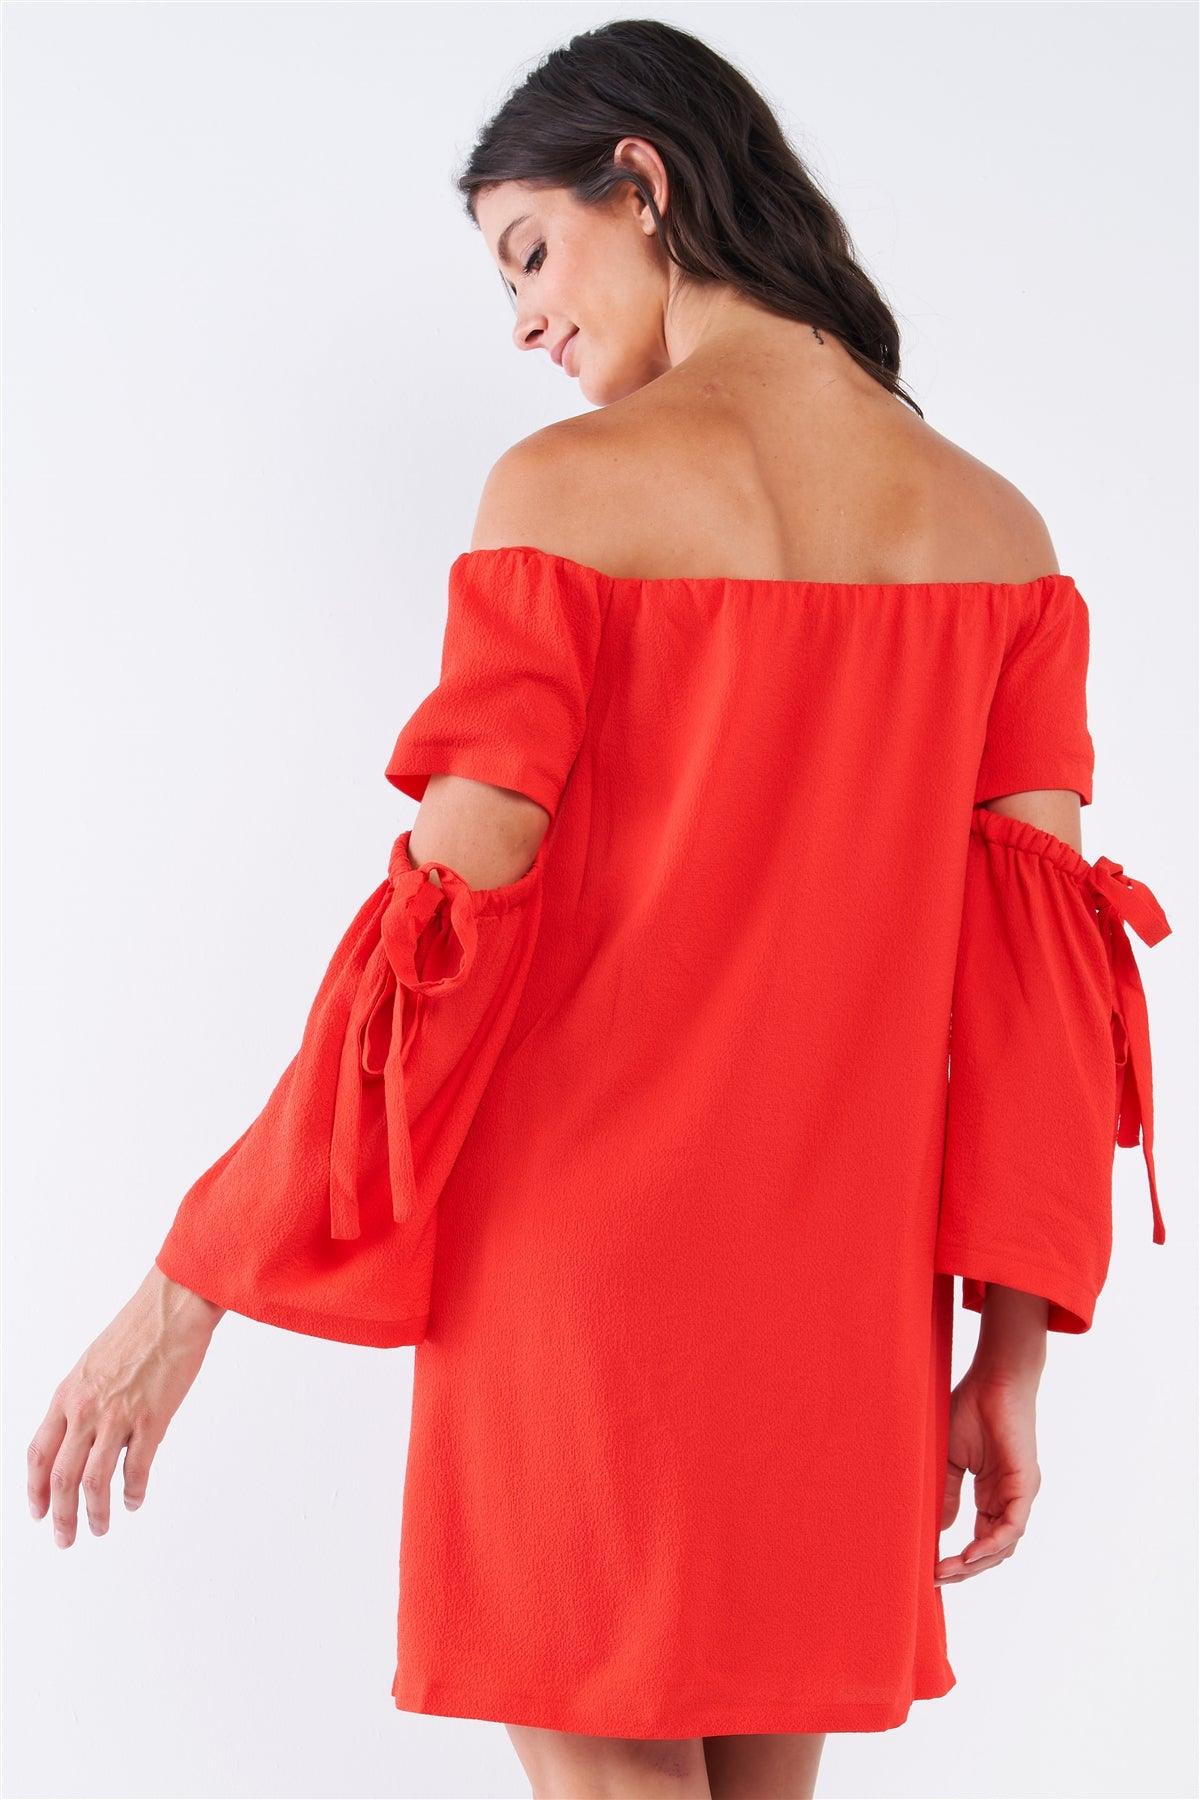 Coral Red Off-The-Shoulder Relaxed Fit Cut Out Bell Sleeve With Elastic Ribbon Tie Mini Dress /1-2-2-1